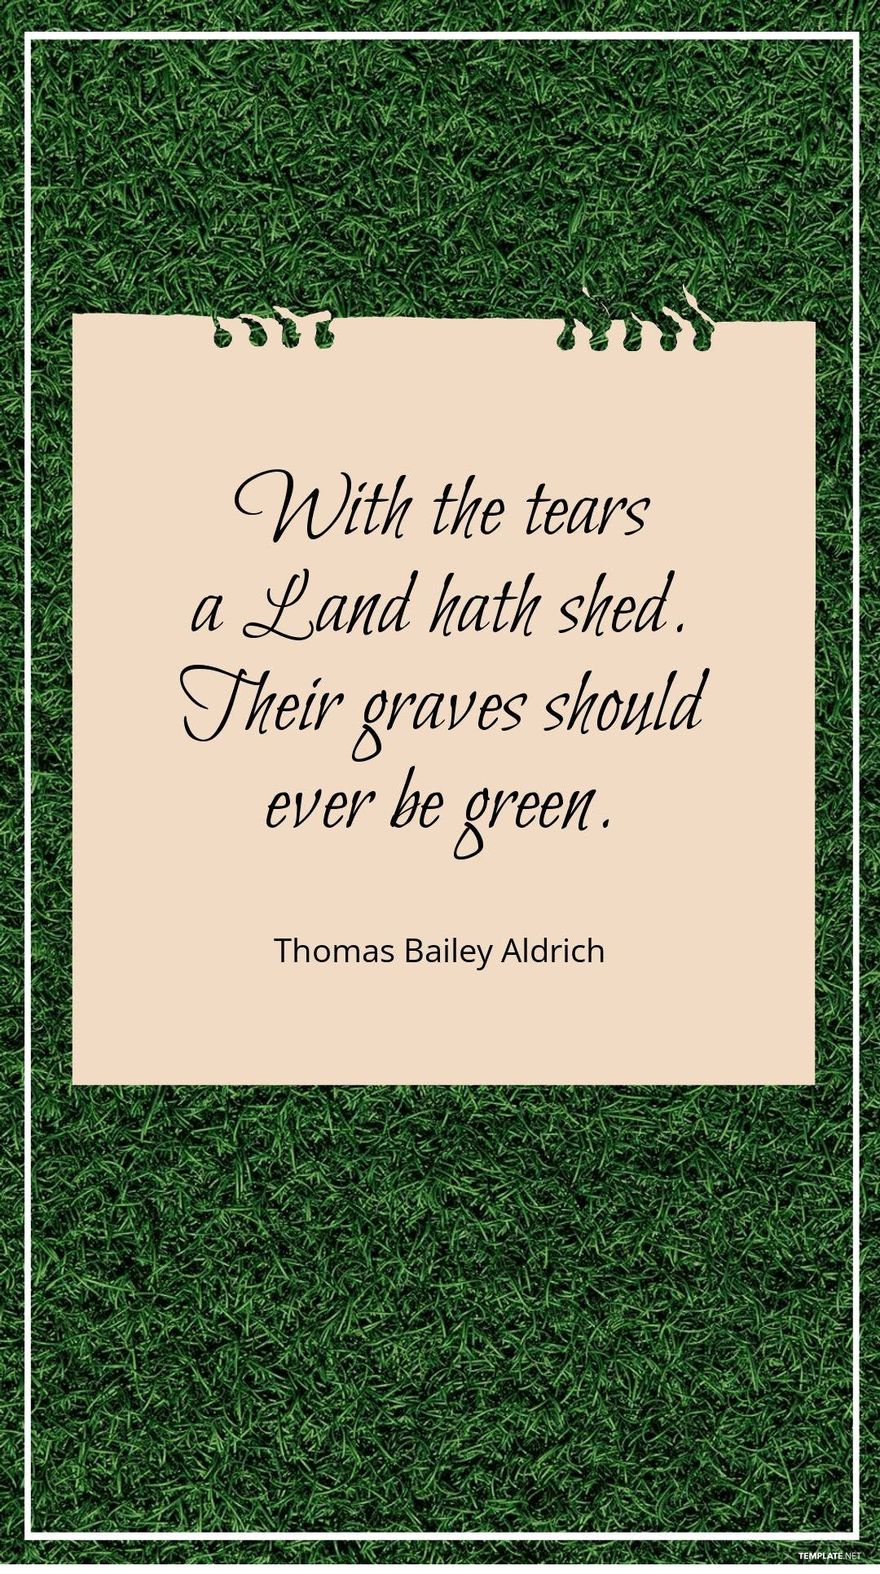 Free Thomas Bailey Aldrich - With the tears a Land hath shed. Their graves should ever be green. in JPG